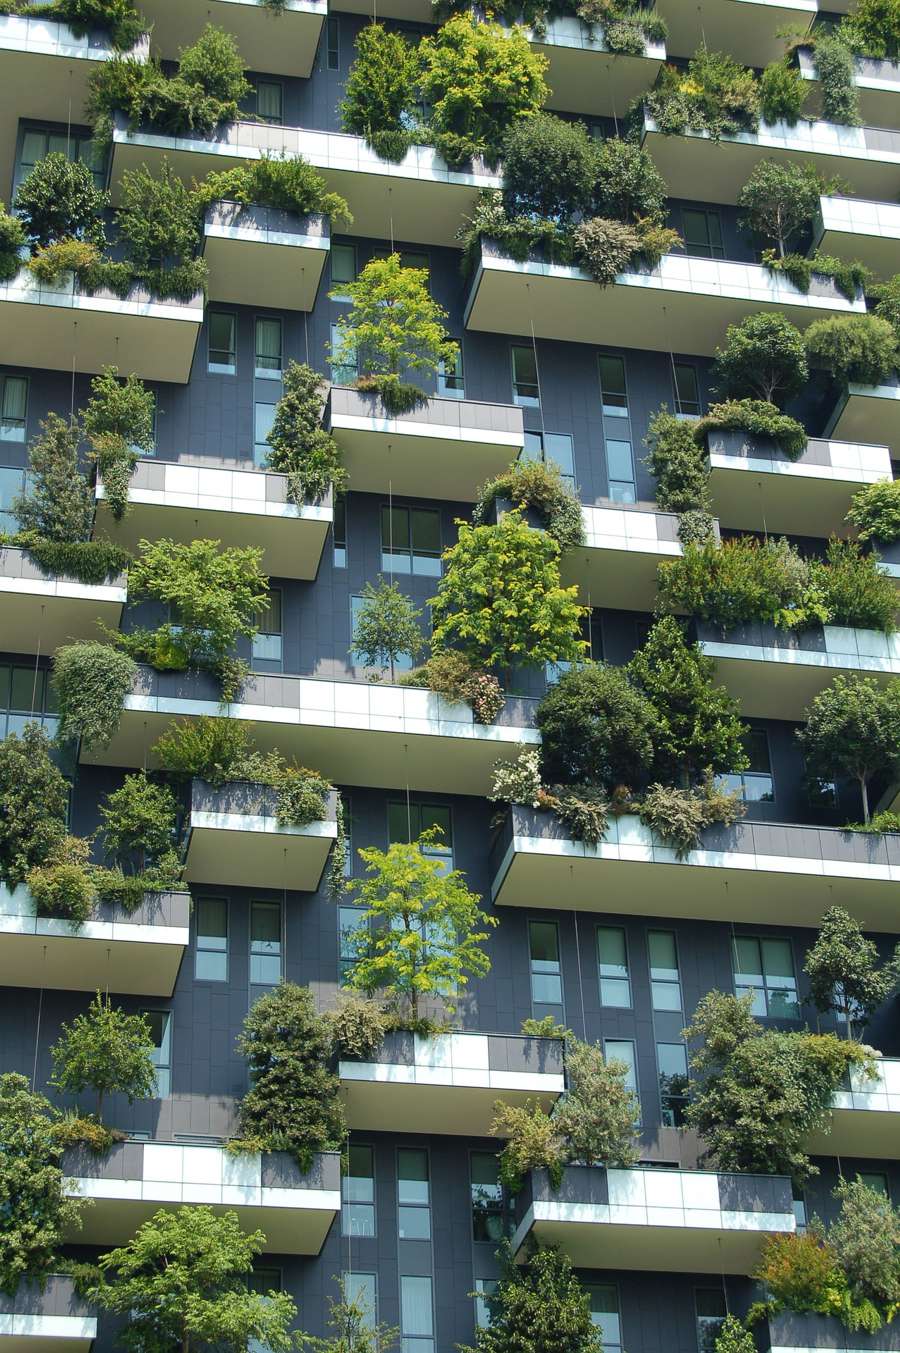 Essential considerations for Designing Green Buildings